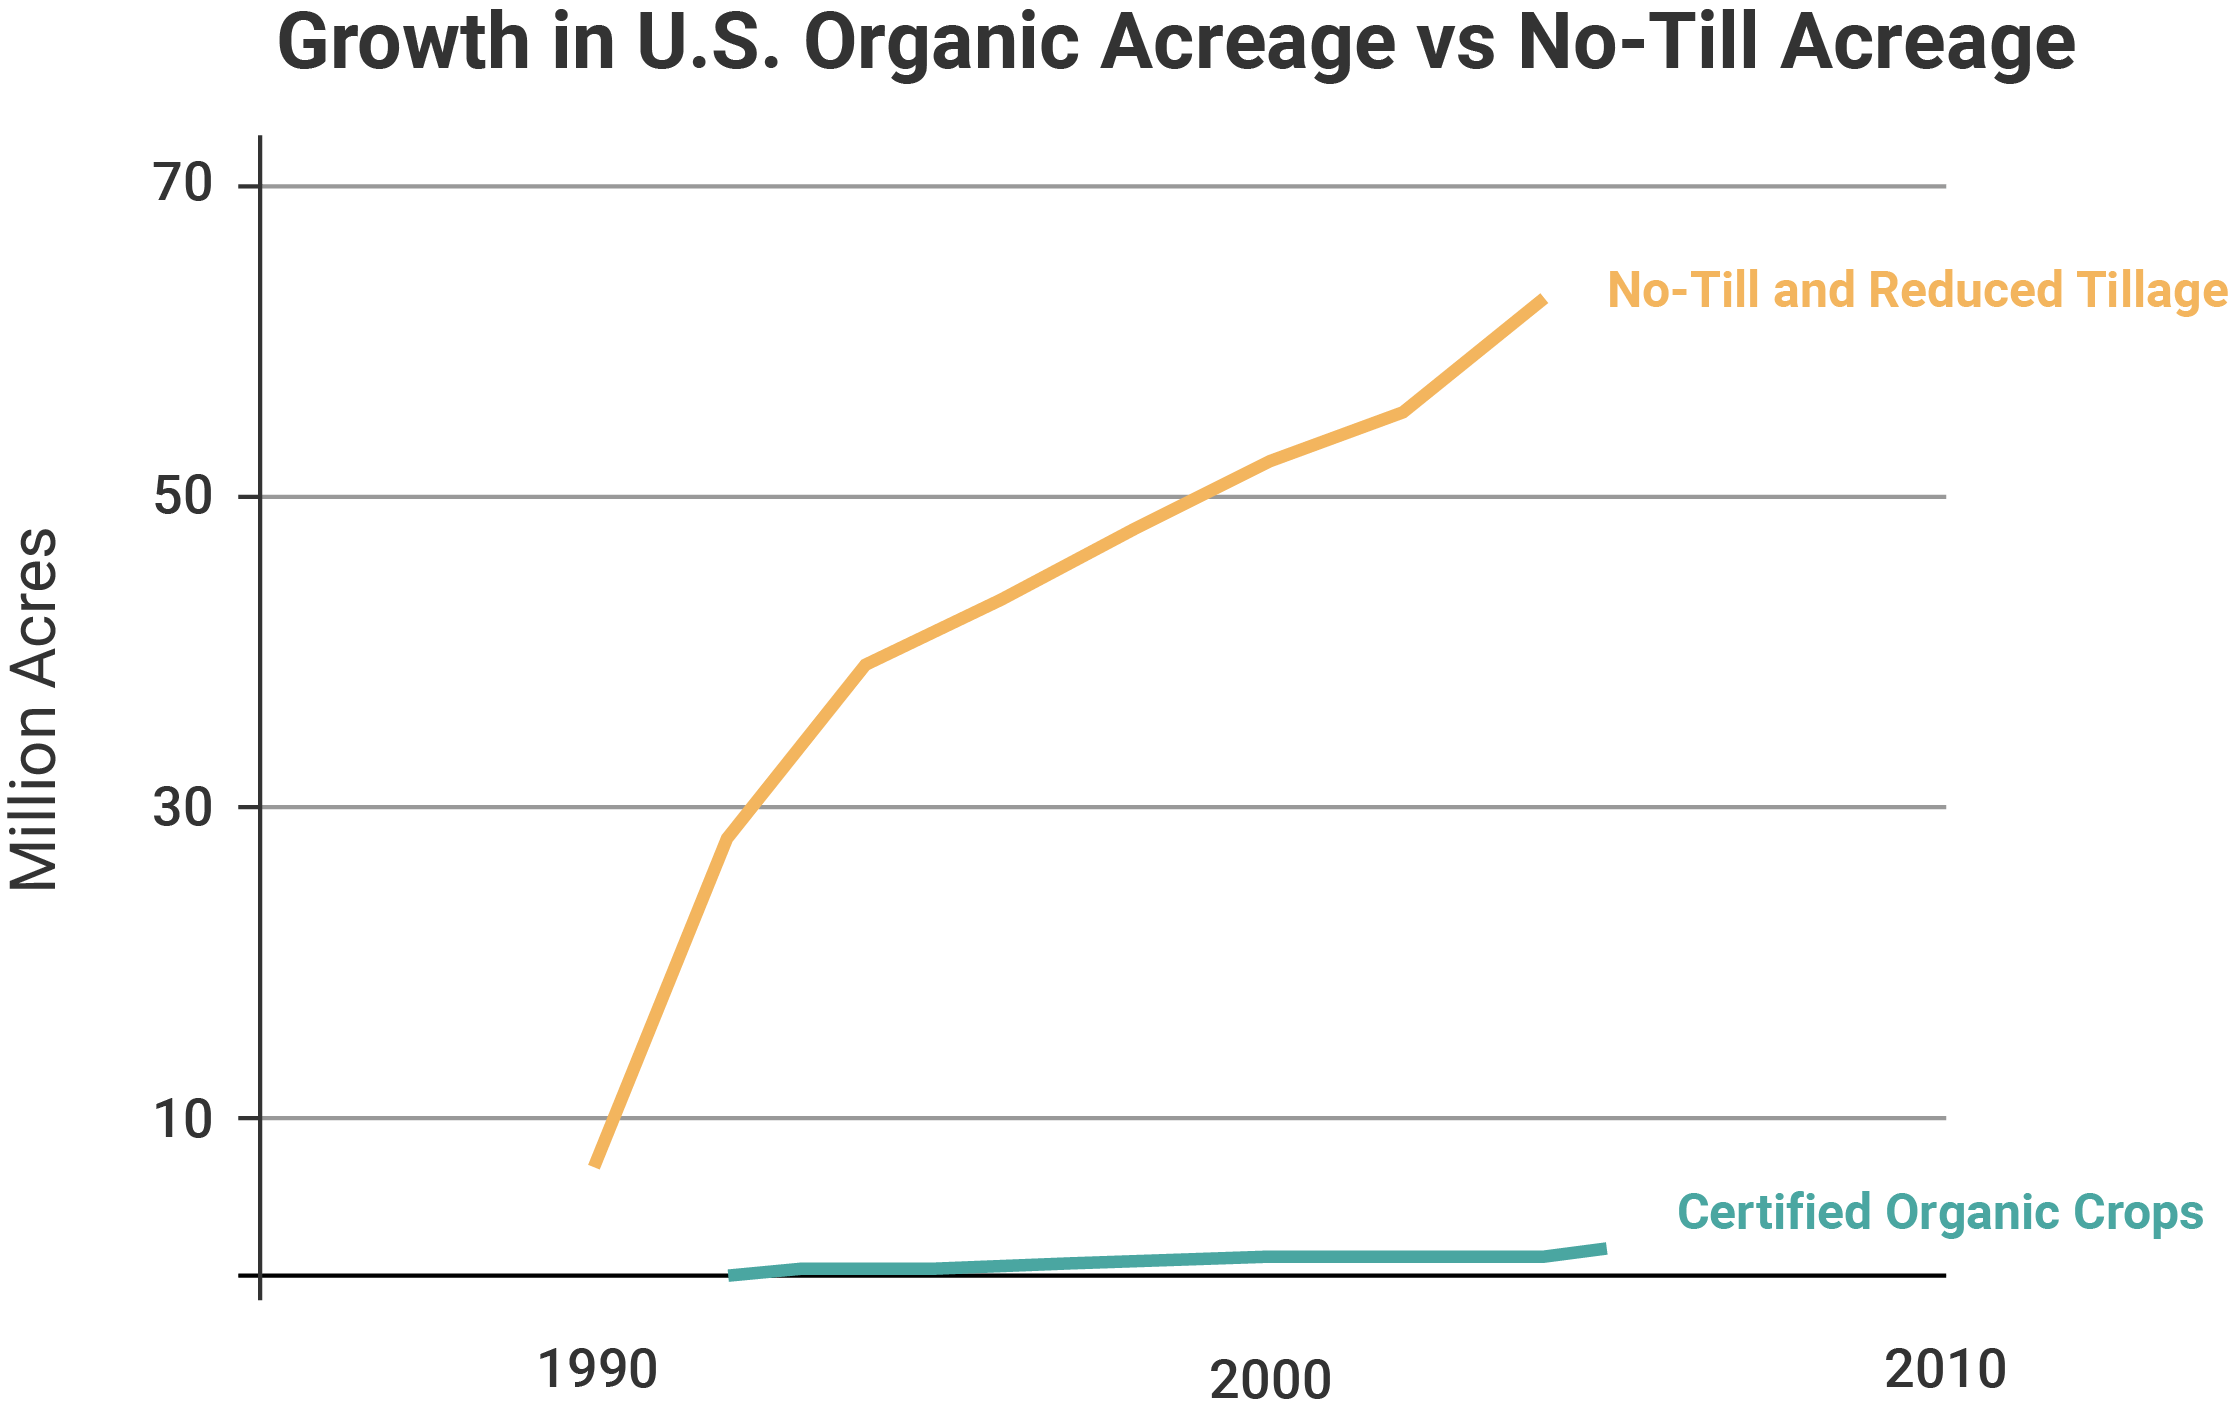 A graph showing the growth in no-till acreage versus organic acreage in U.S. agriculture from 1990 to 2010.